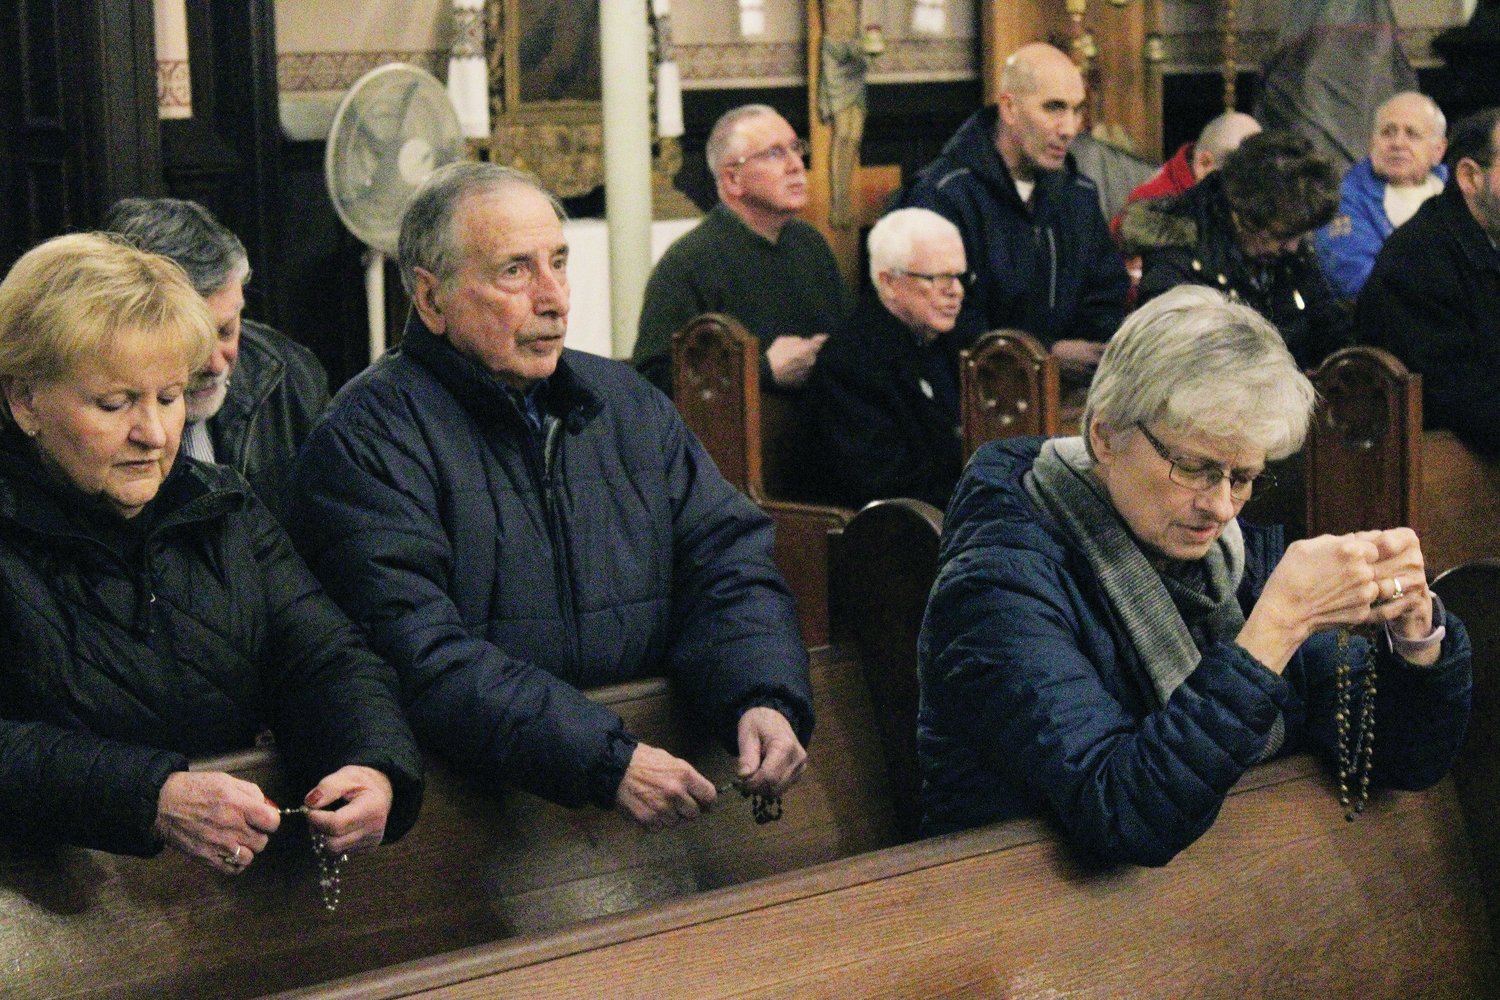 St. Michael’s Ukrainian Catholic Church in Woonsocket held a Rosary prayer service with the Knights of Columbus for peace in Ukraine on Friday Feb. 24.